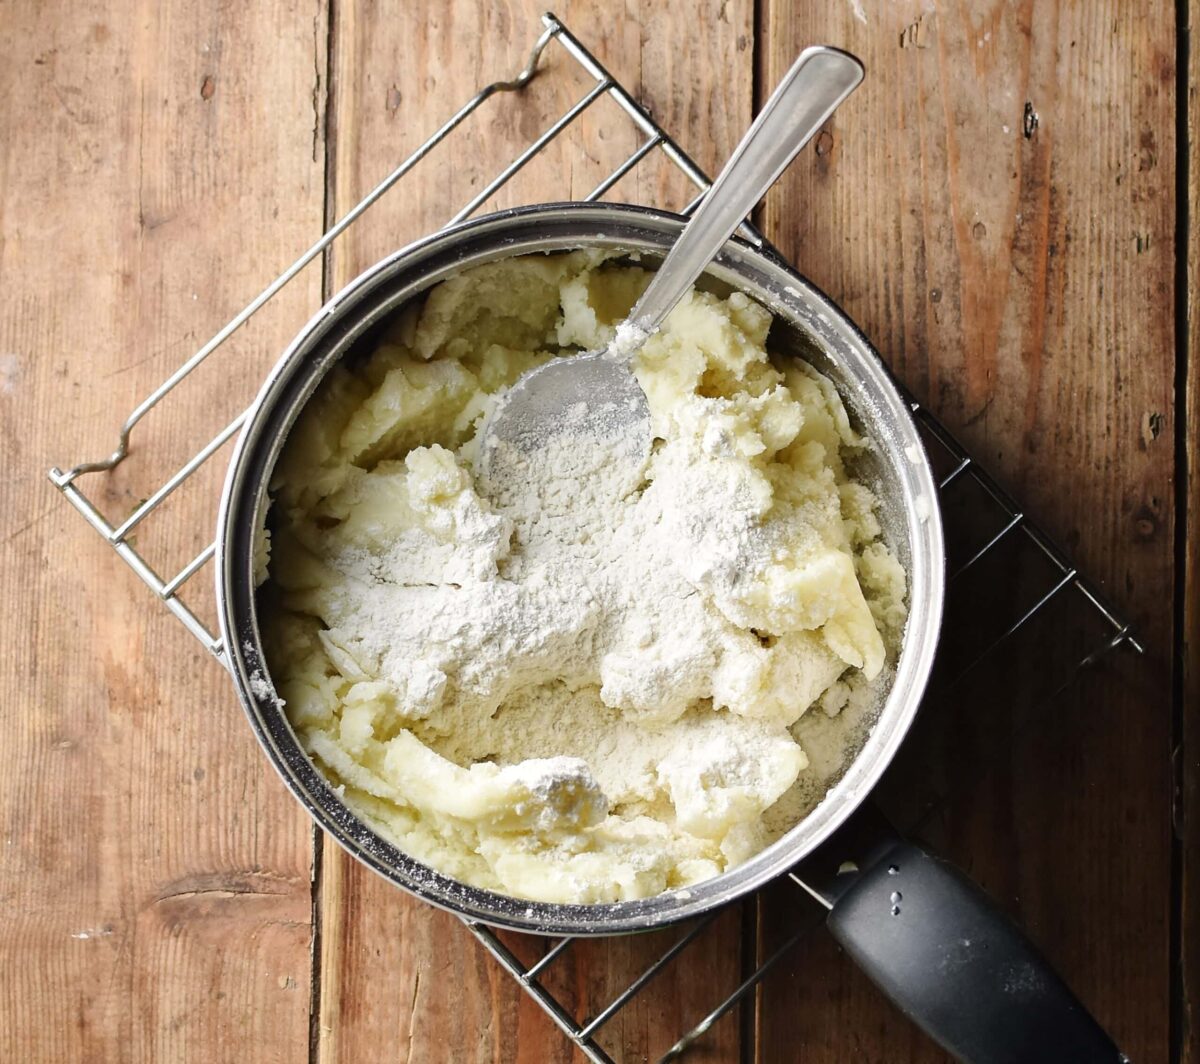 Mashed potatoes with flour and large spoon in pot.